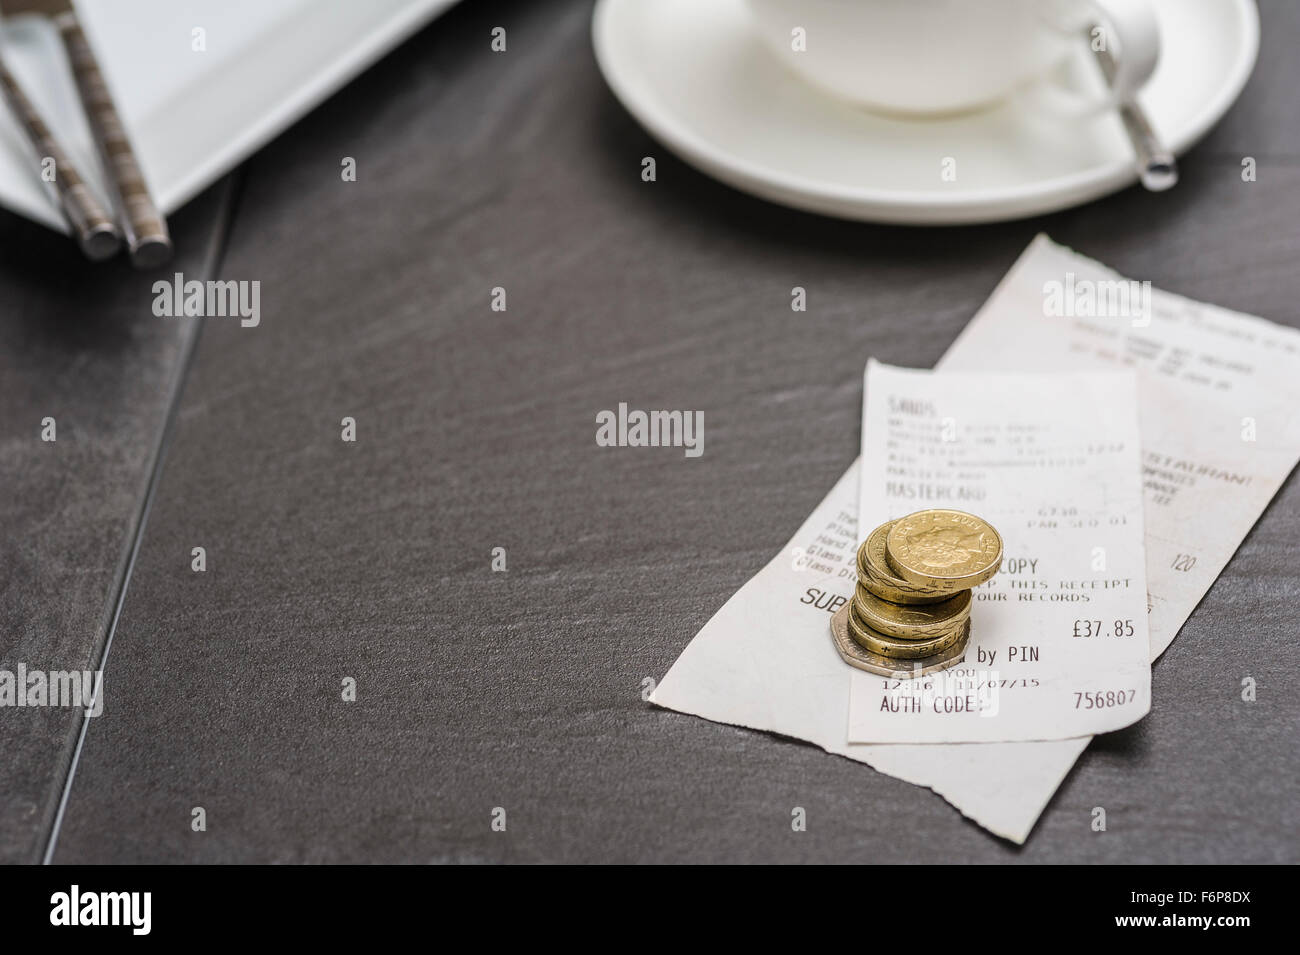 Restaurant leaving a gratuity and bill paying. Leaving a tip after a meal.or check with a tip. Stock Photo